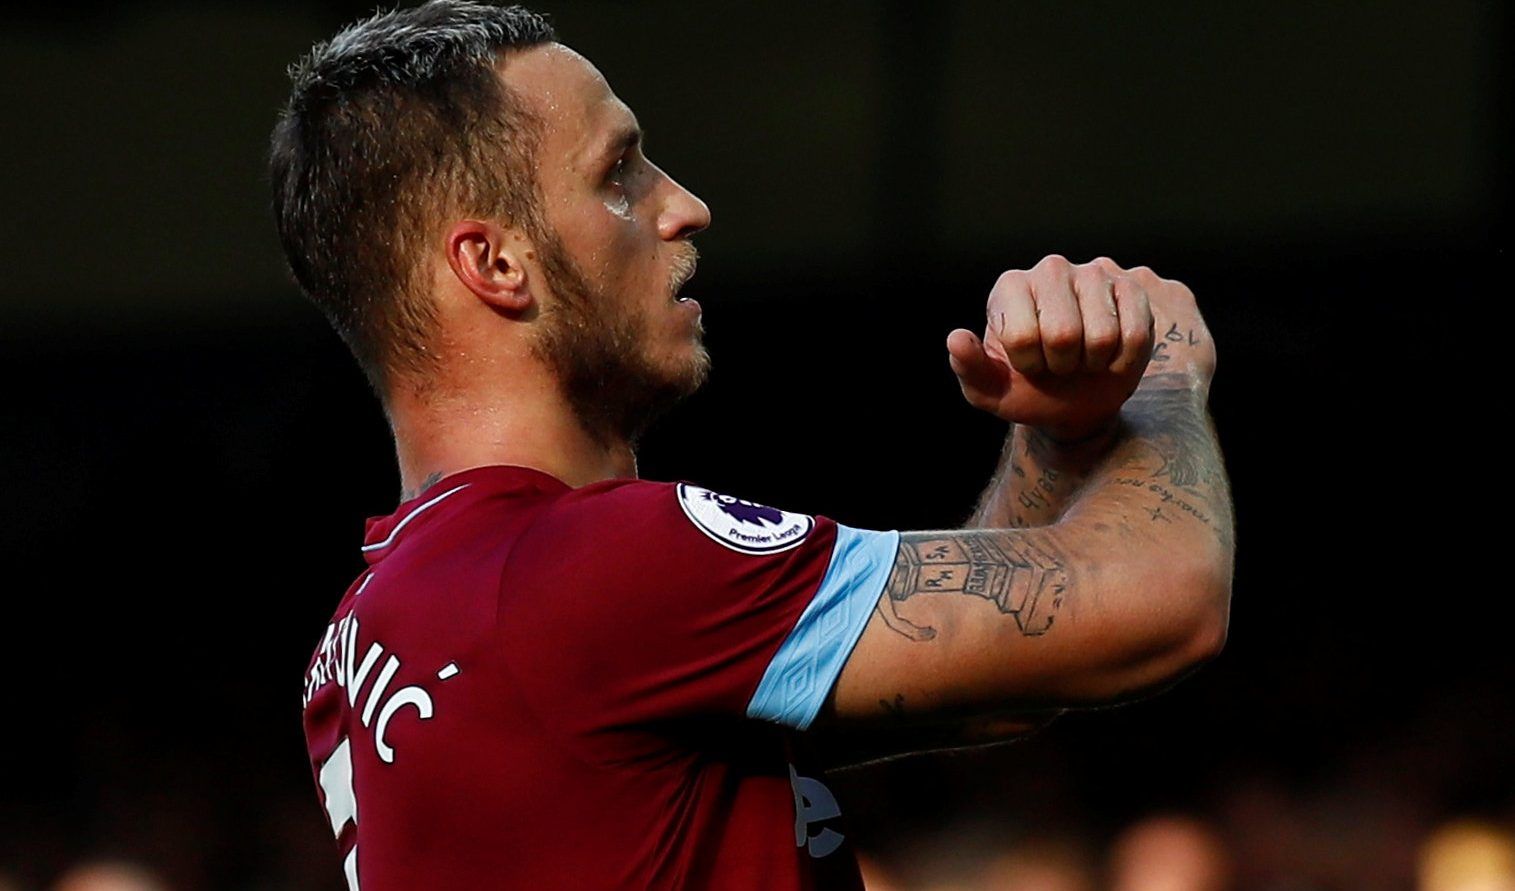 Soccer Football - Premier League - Everton v West Ham United - Goodison Park, Liverpool, Britain - September 16, 2018  West Ham's Marko Arnautovic celebrates scoring their third goal   Action Images via Reuters/Jason Cairnduff  EDITORIAL USE ONLY. No use with unauthorized audio, video, data, fixture lists, club/league logos or 